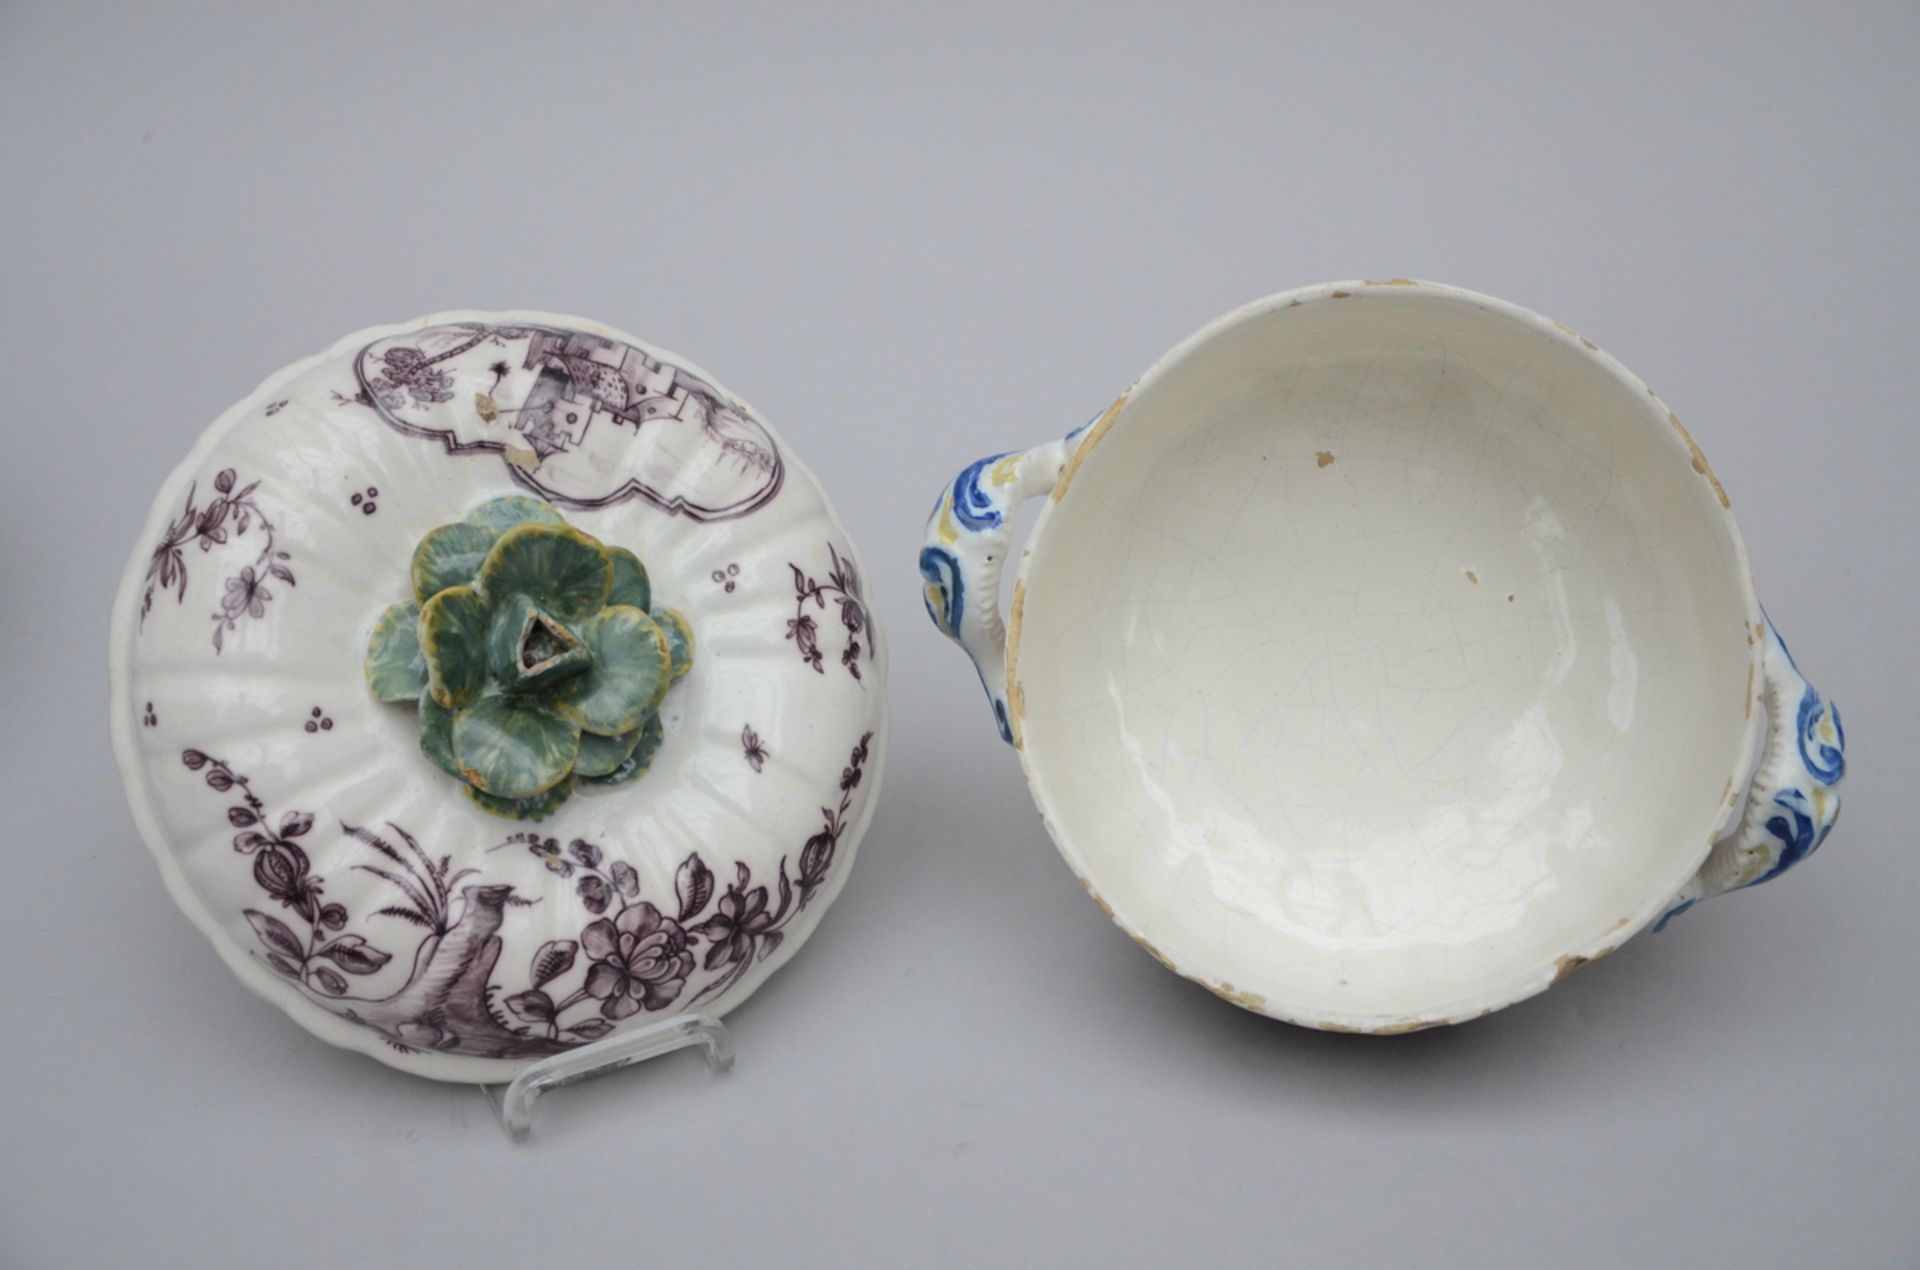 A 'manganèse' tureen in faience from Saint-Omer, 18th century (18x23 cm) - Image 3 of 4